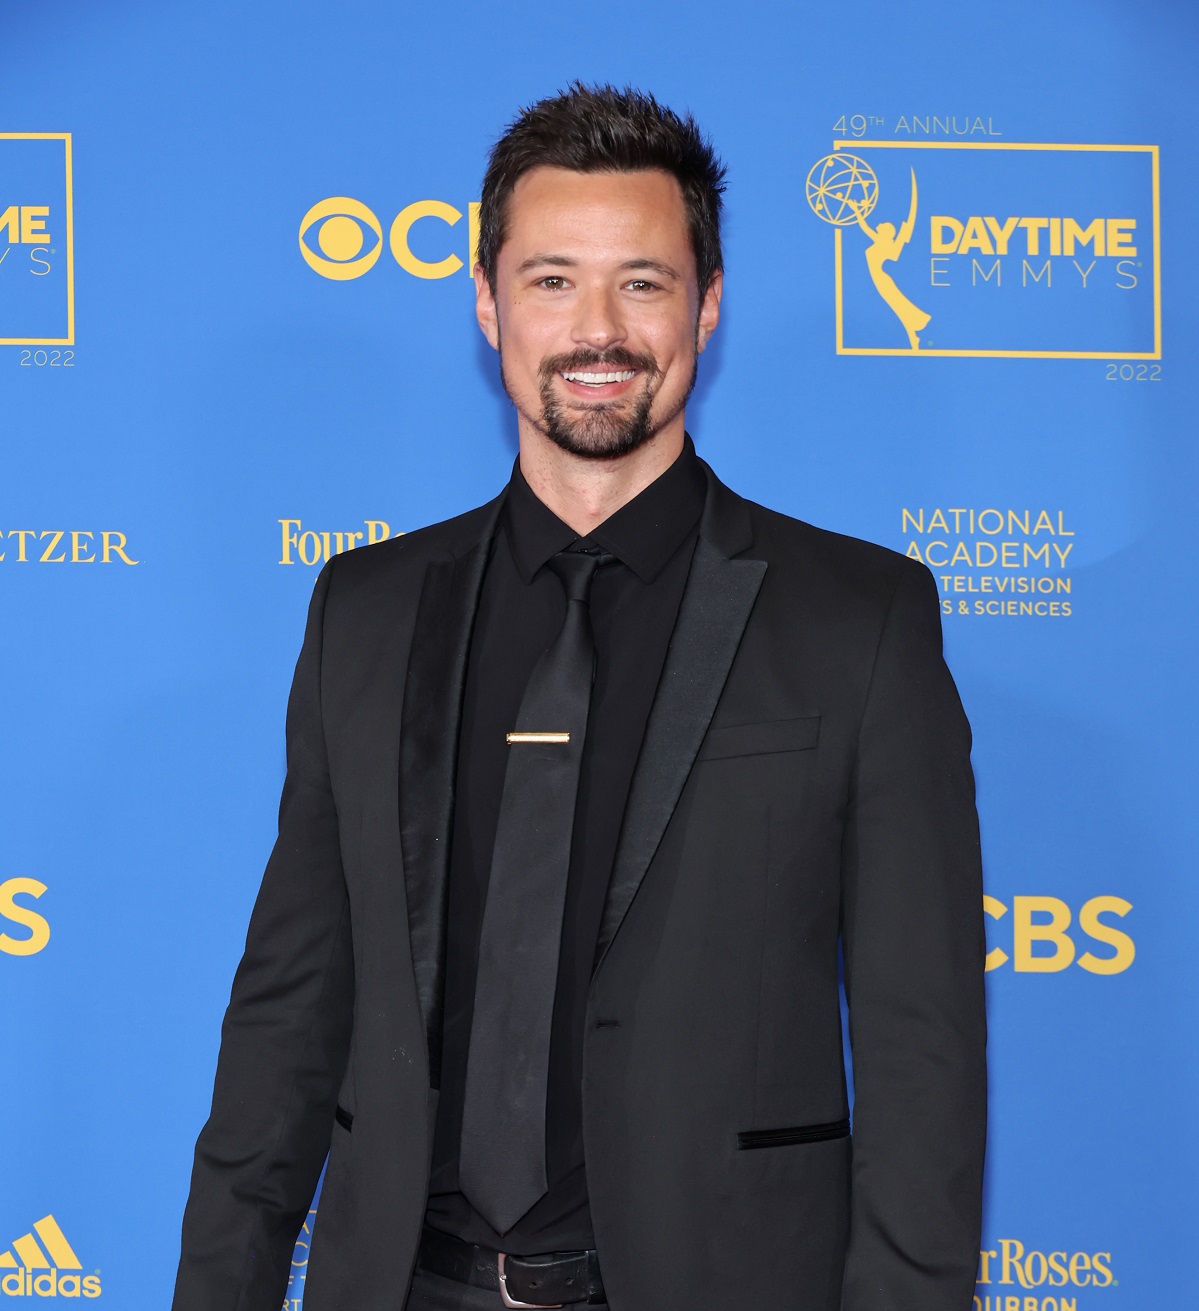 'The Bold and the Beautiful' star Matthew Atkinson wearing a black suit, poses for a photo during he 2022 Daytime Emmys.